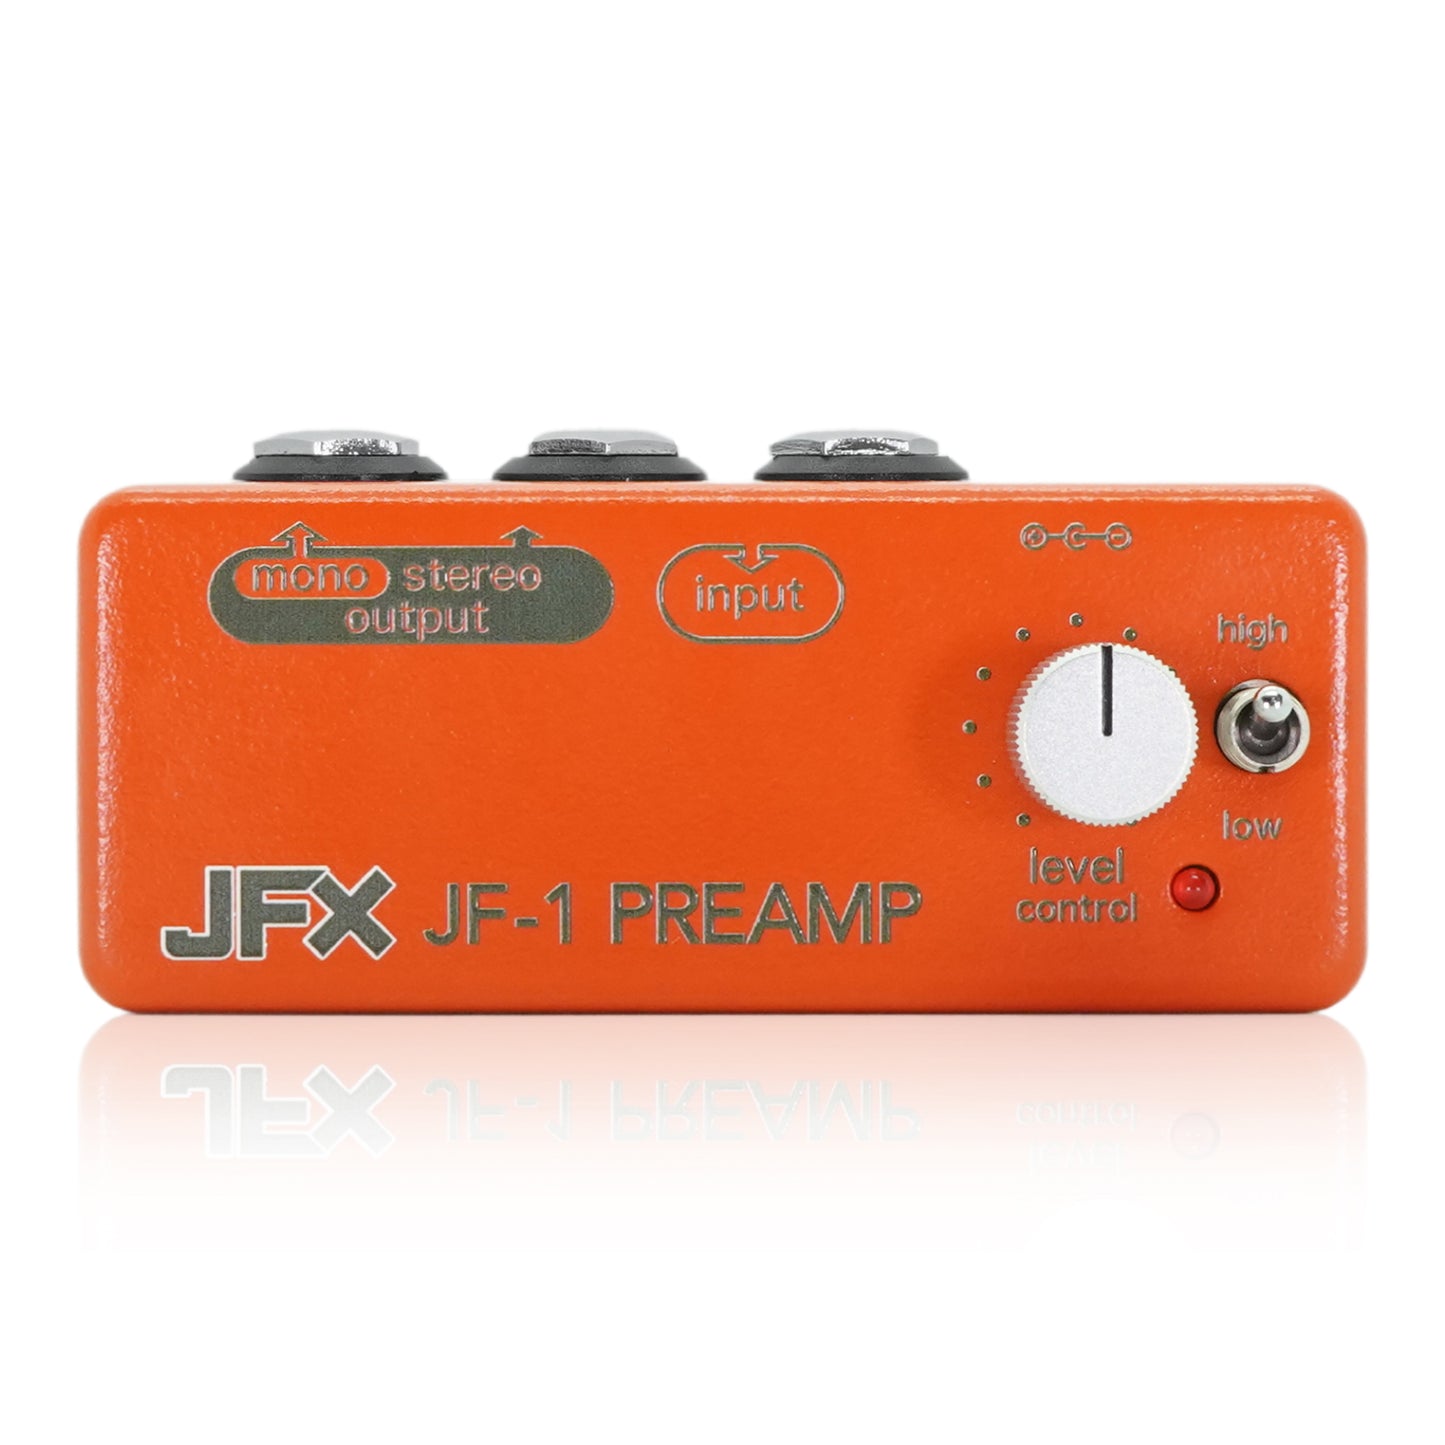 JFX Pedals / JF-1 Preamp